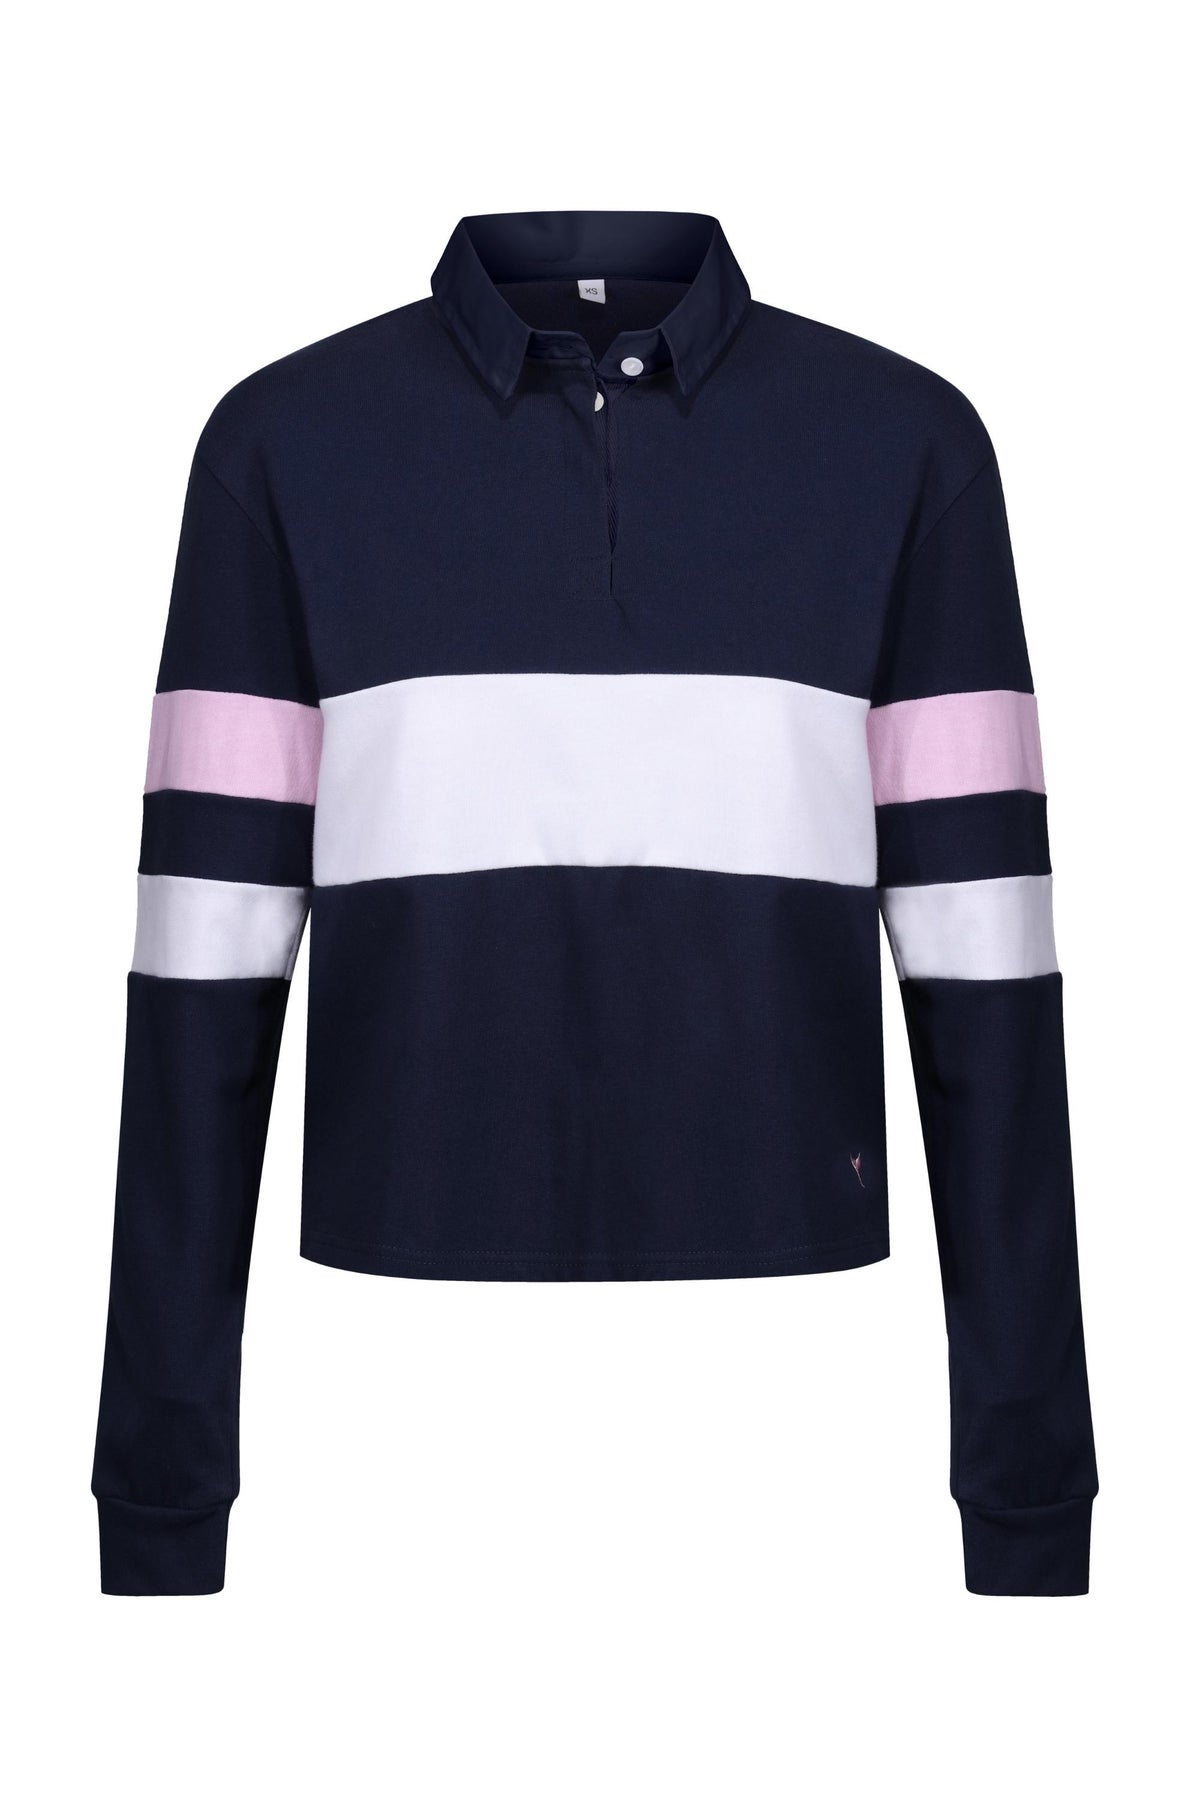 Fring Rugby Shirt - Navy - Whale Of A Time Clothing